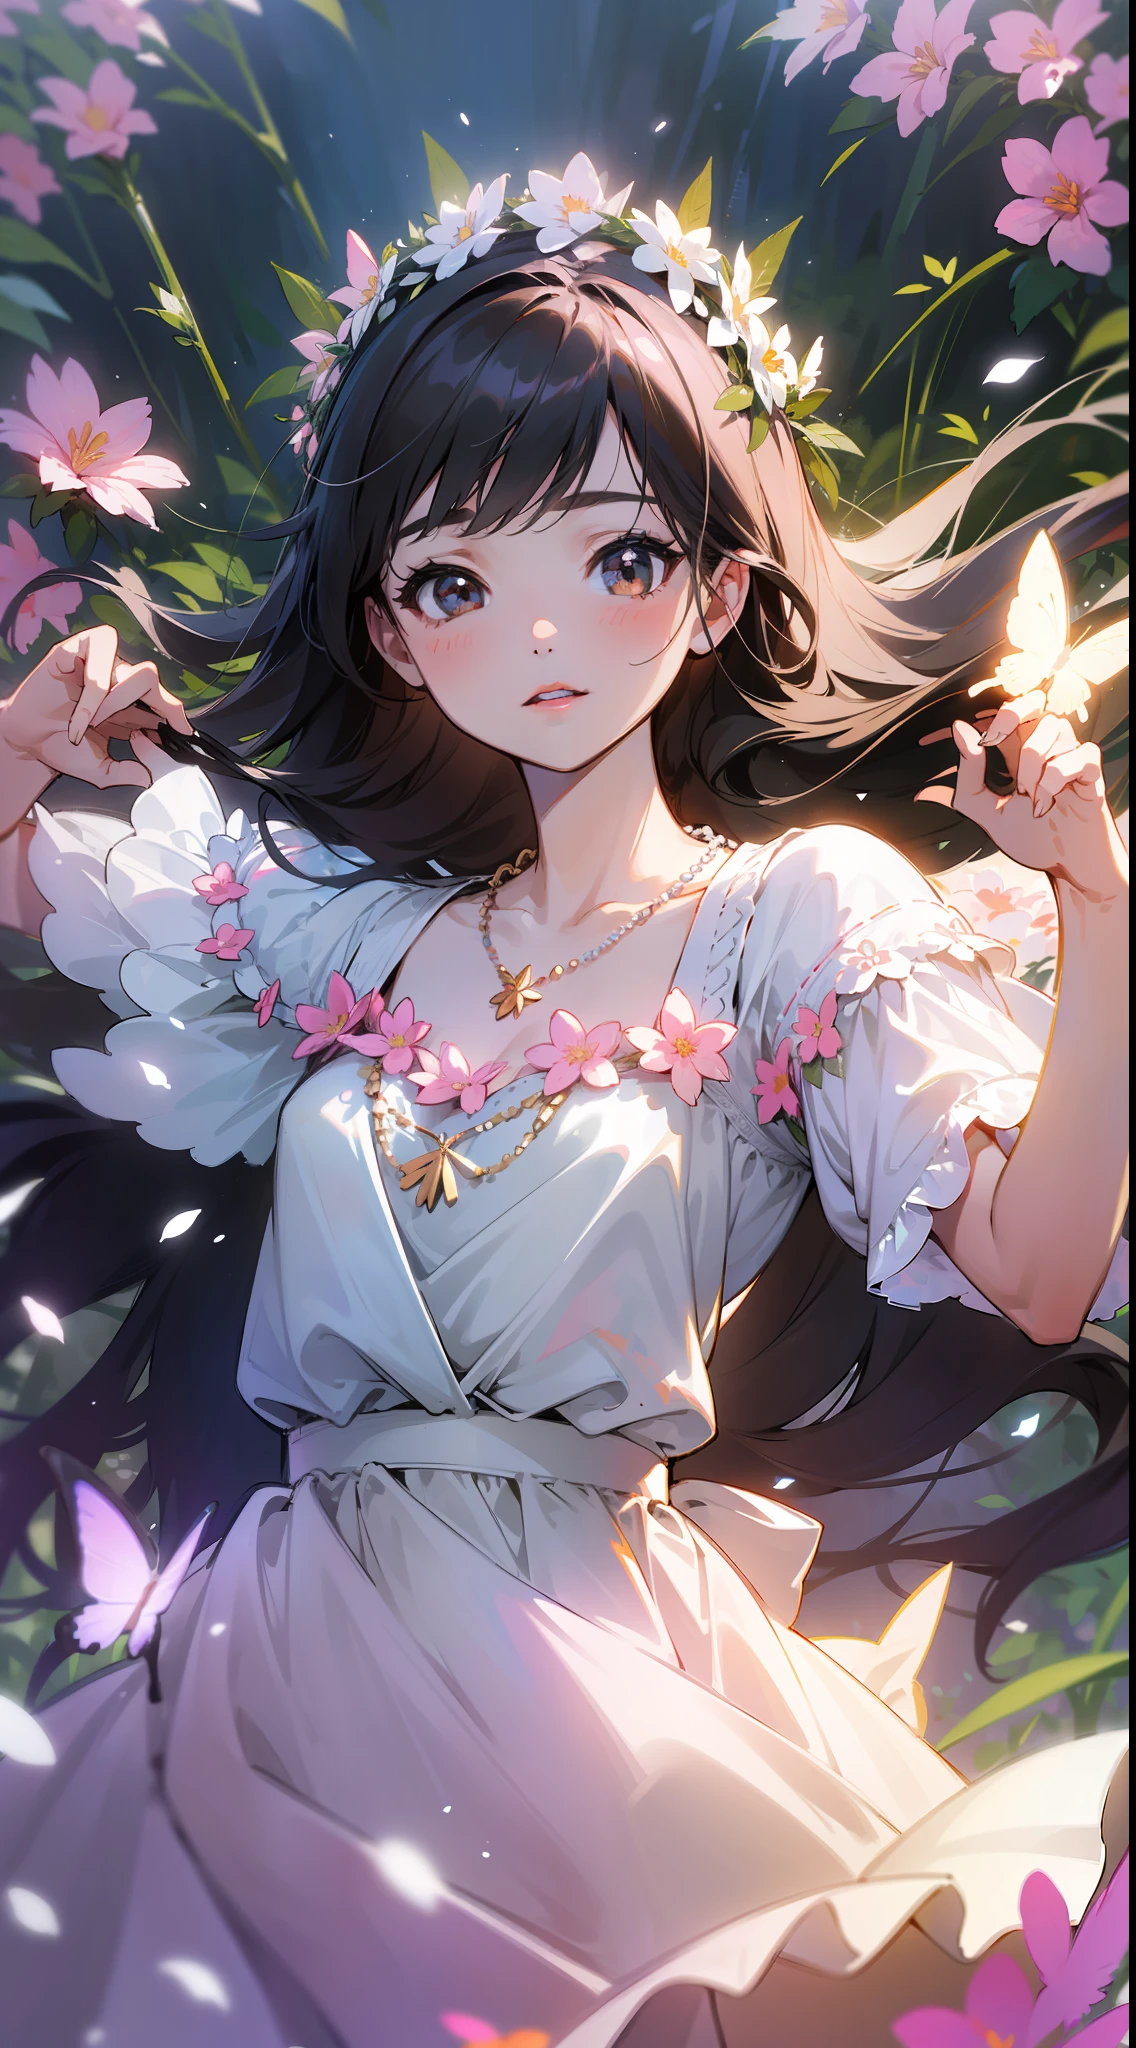 ((SFW)),Masterpiece, High Quality, ((Photoreal)), Cinematic Direction, (High Contrast), Depth of Field, (Award-winning Difference Photo), Face Detail, Detailed Drawing, There is a place in the forest where flowers bloom, Girl dancing in a snow-white summer dress in the flower field, Girl is 9 years old, Black hair very long hair, Summer sky, Summer clouds, (Summer dazzling sunlight: 1.2) , flower garden, open-arms girl, necklace, flower crown, butterfly, fluttering petals, dynamic movement, dance,